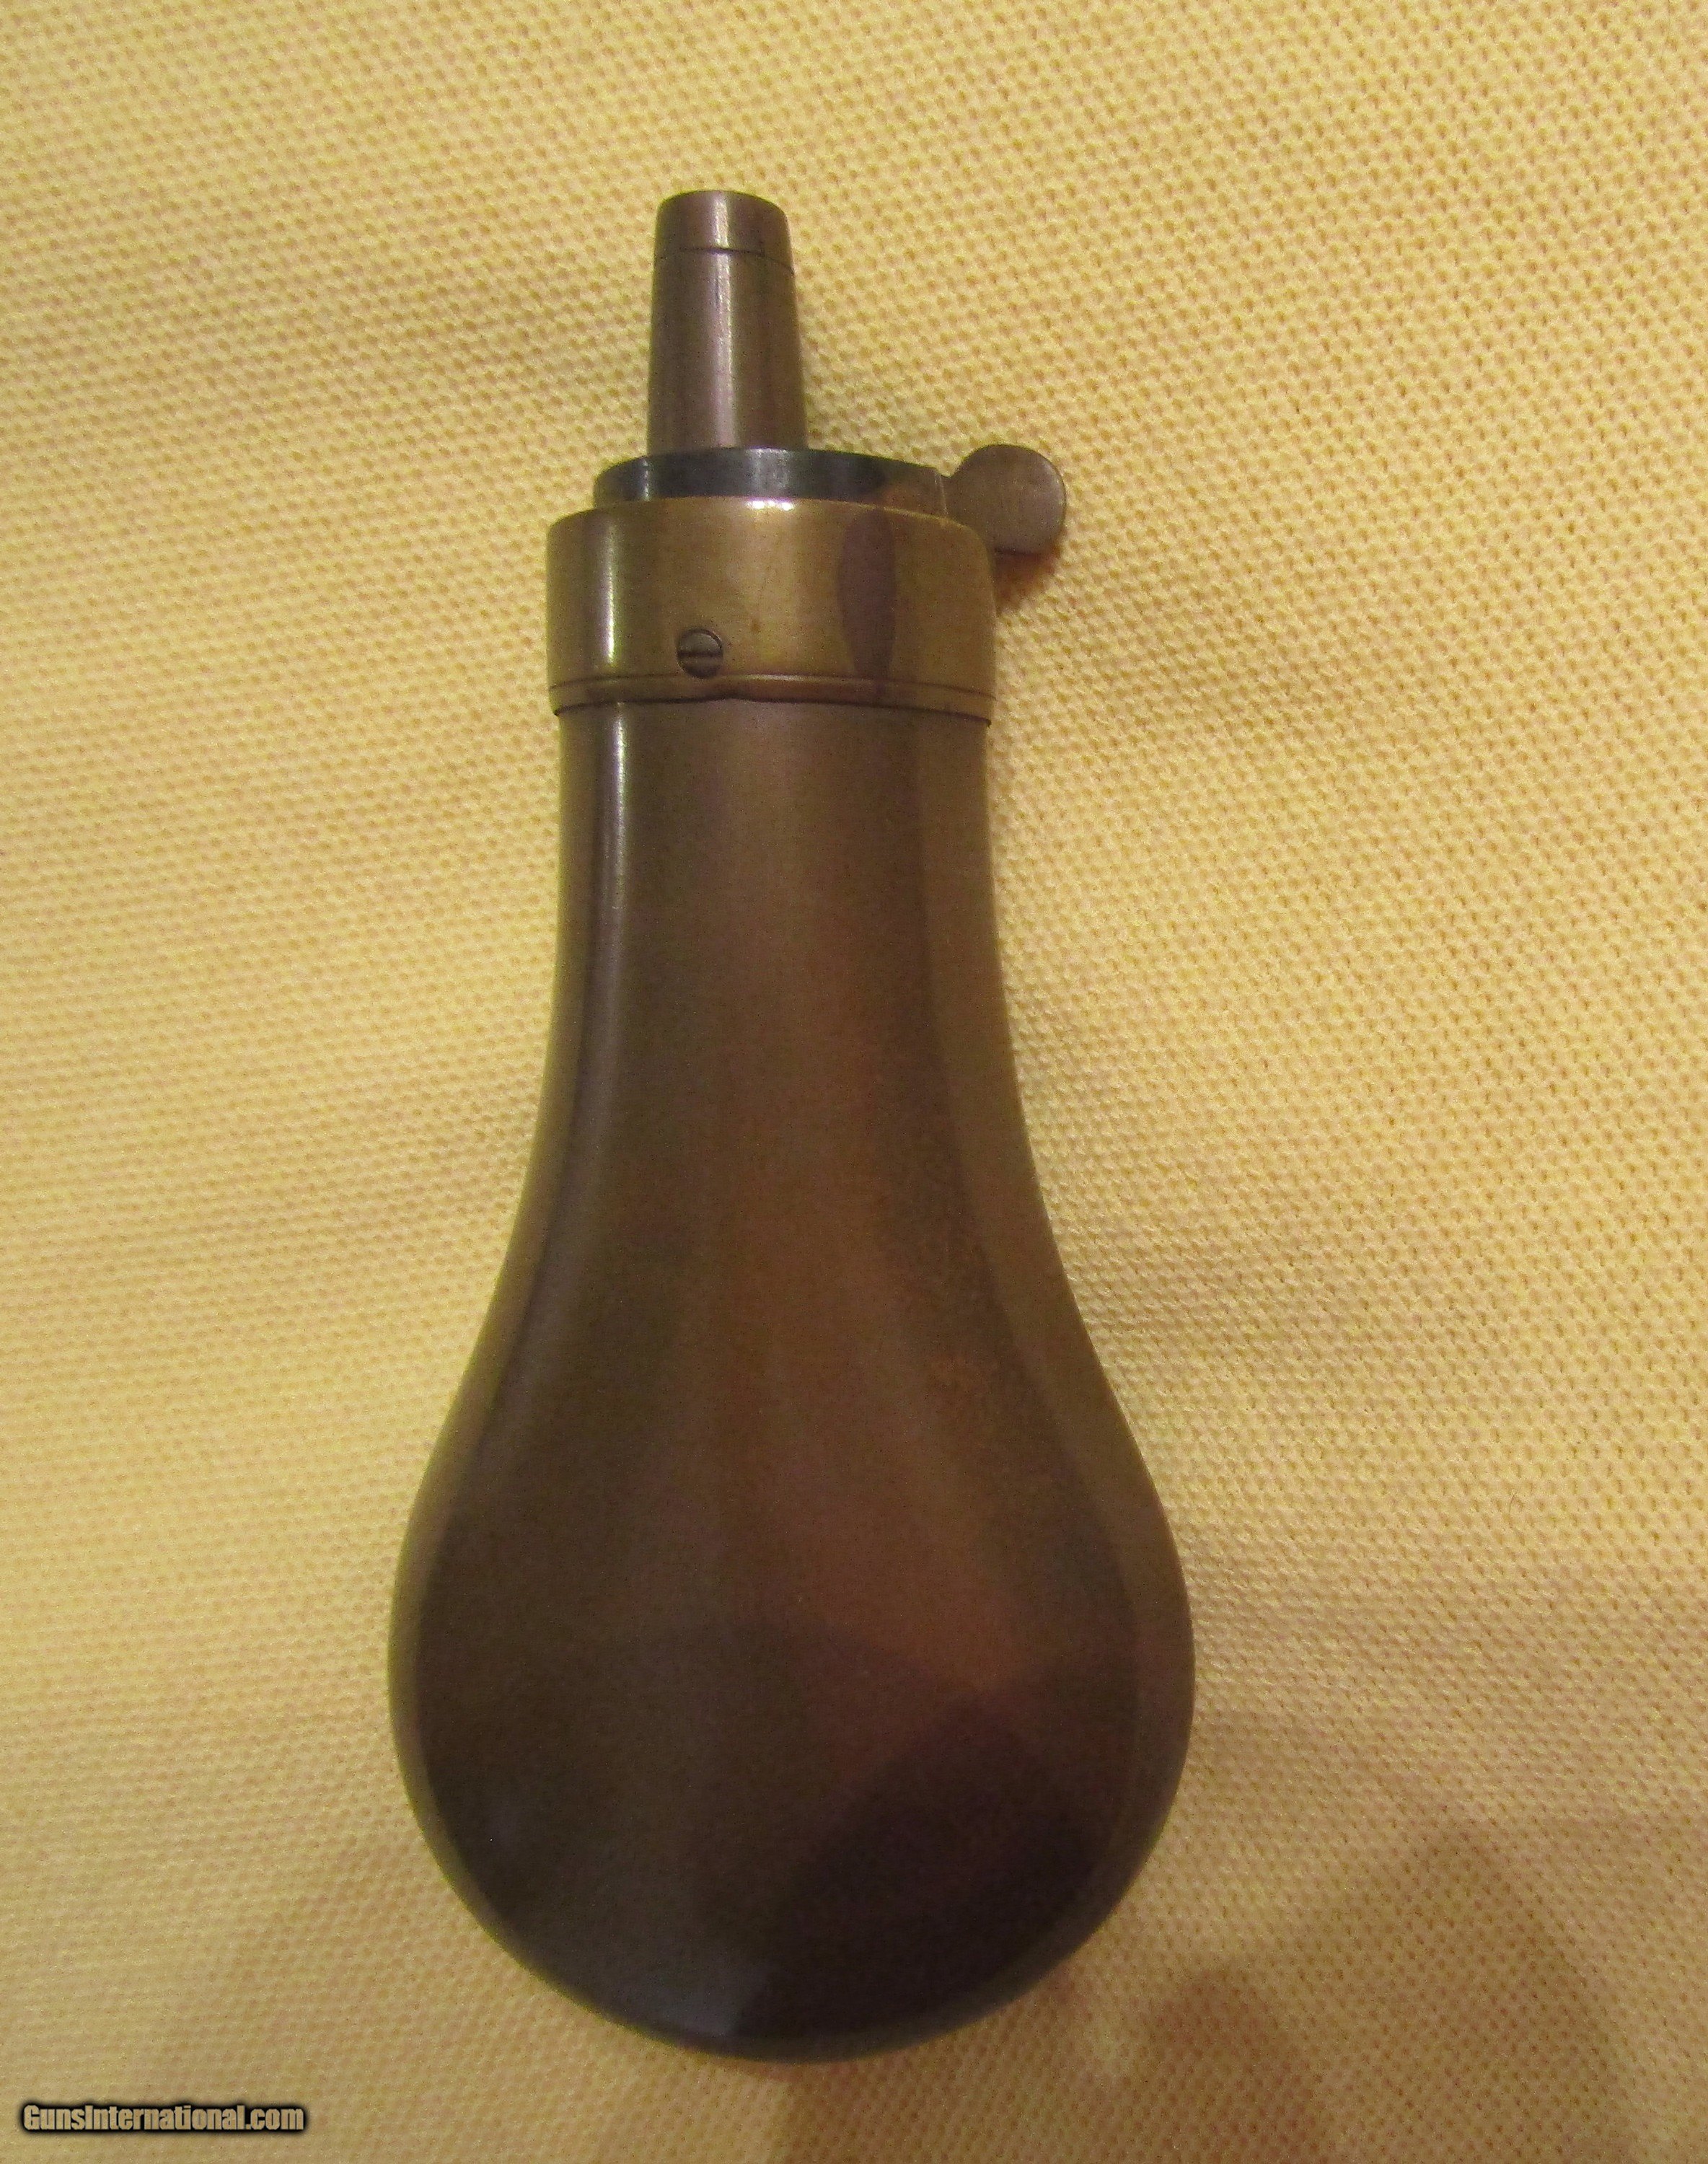 Colts Patent Powder Flask for 1862 36 Cal Pocket Police or 1862